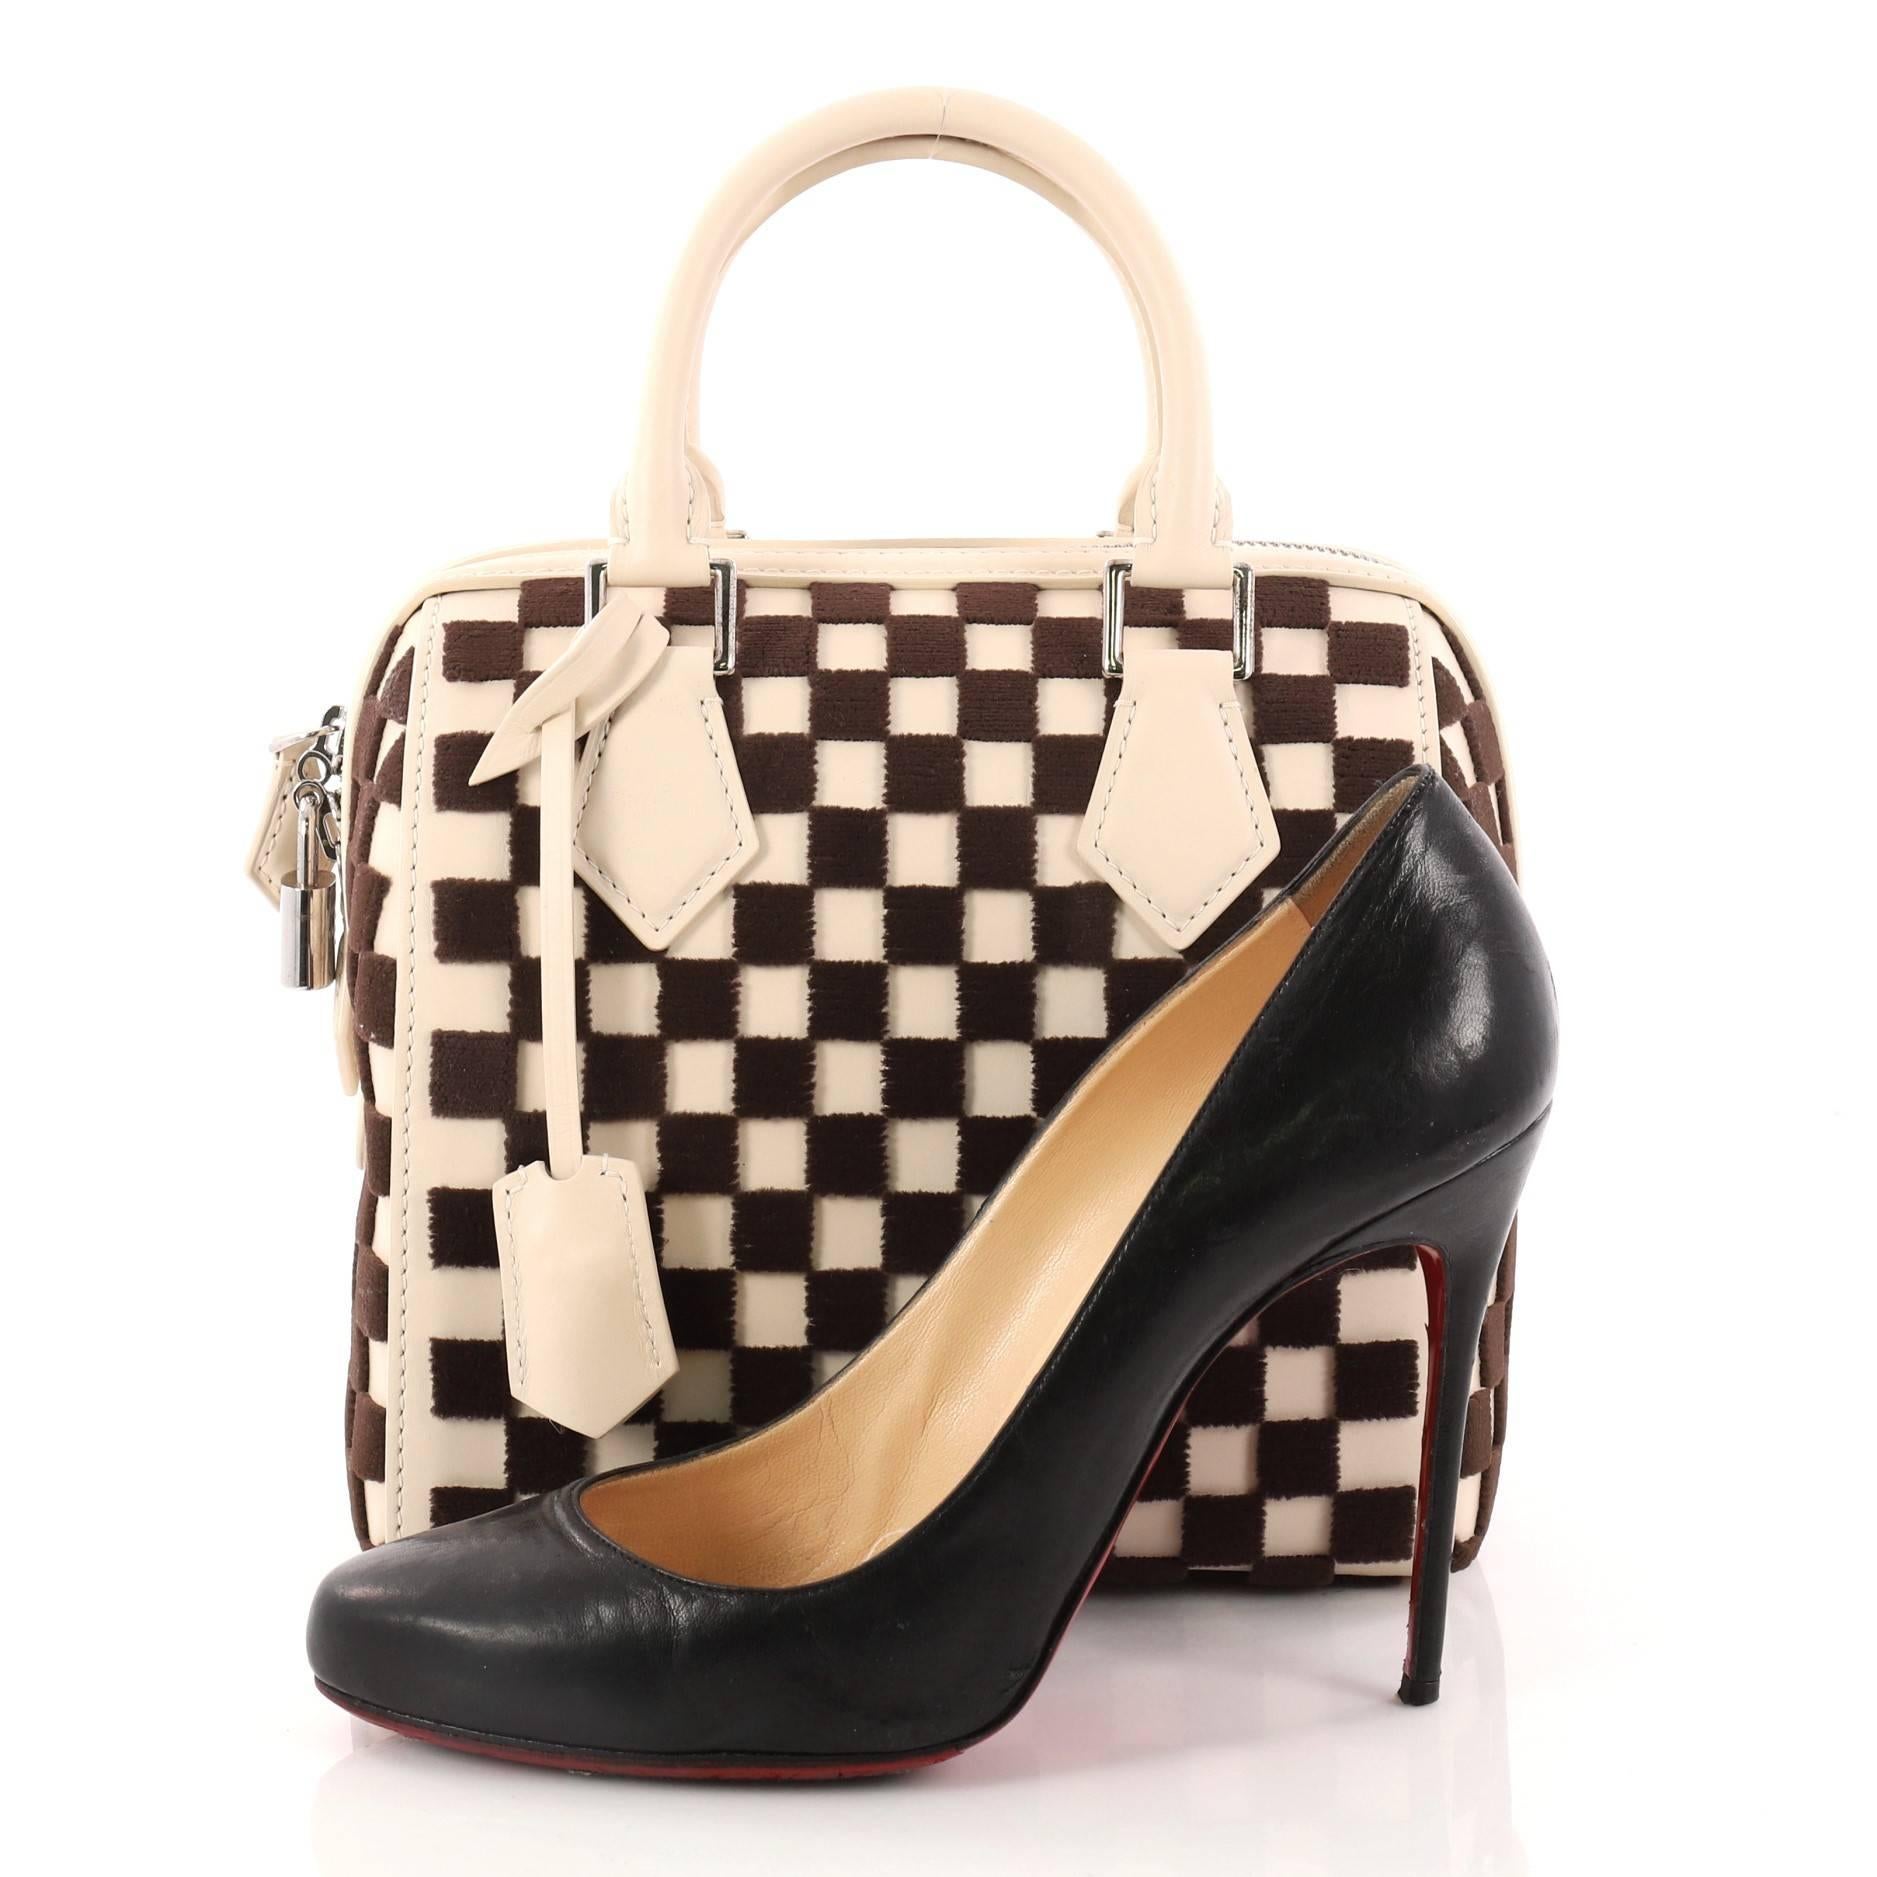 This authentic Louis Vuitton Speedy Cube Bag Damier Cubic Leather and Velvet PM is a limited edition piece showcasing the brand's classic speedy design with an edgy style. Crafted from off-white and brown damier cubic leather and velvet, this Speedy